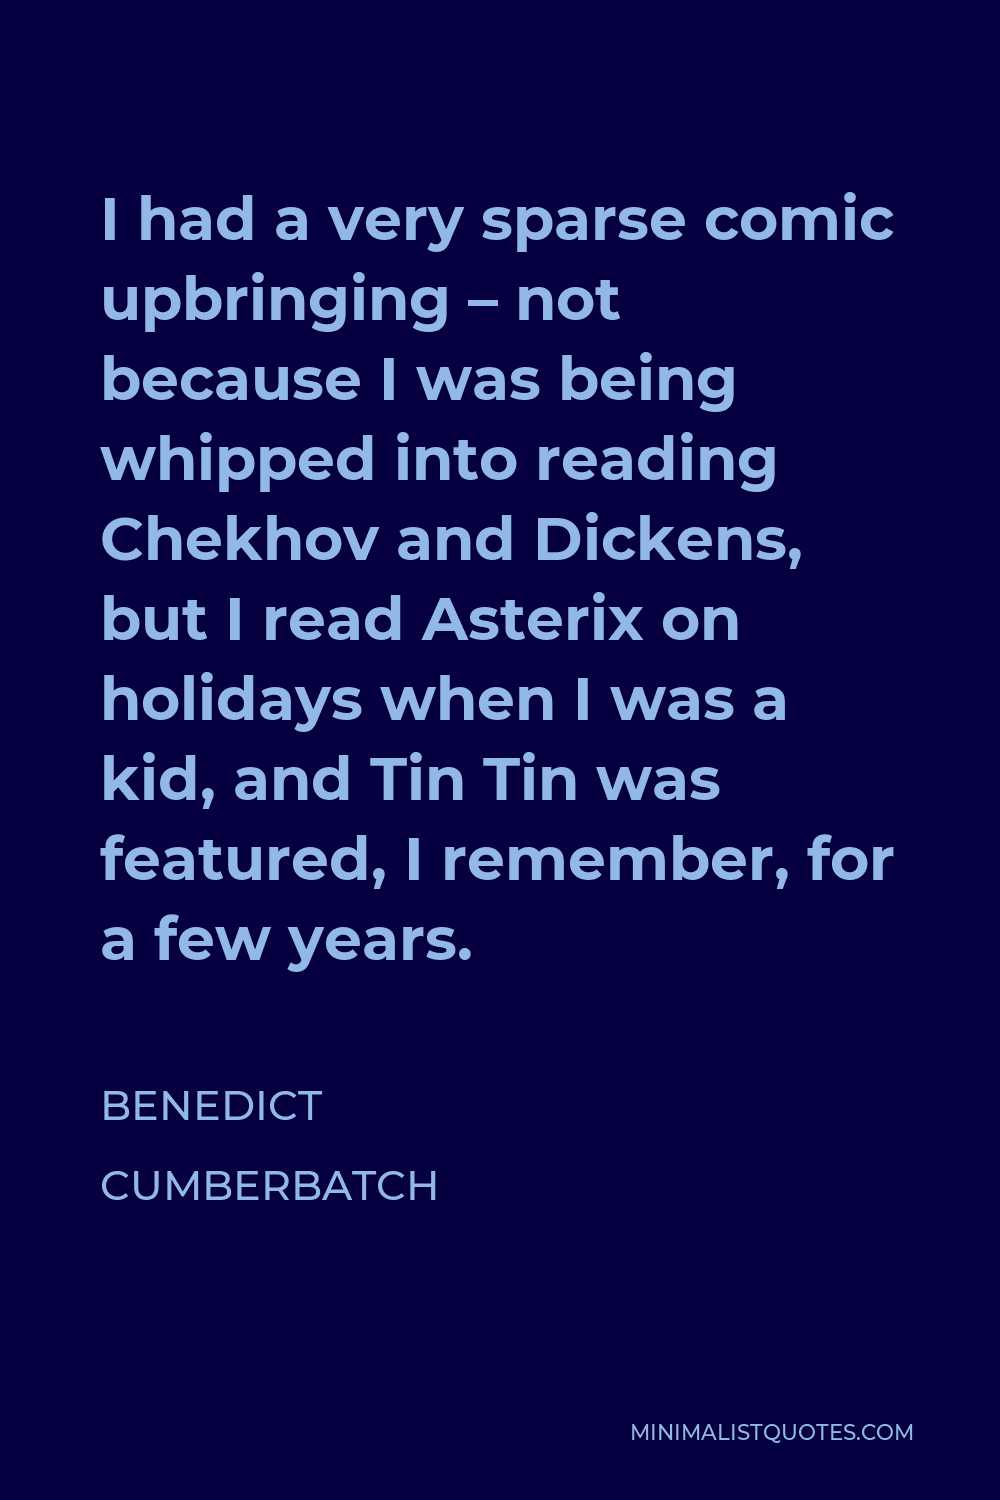 Benedict Cumberbatch Quote - I had a very sparse comic upbringing – not because I was being whipped into reading Chekhov and Dickens, but I read Asterix on holidays when I was a kid, and Tin Tin was featured, I remember, for a few years.